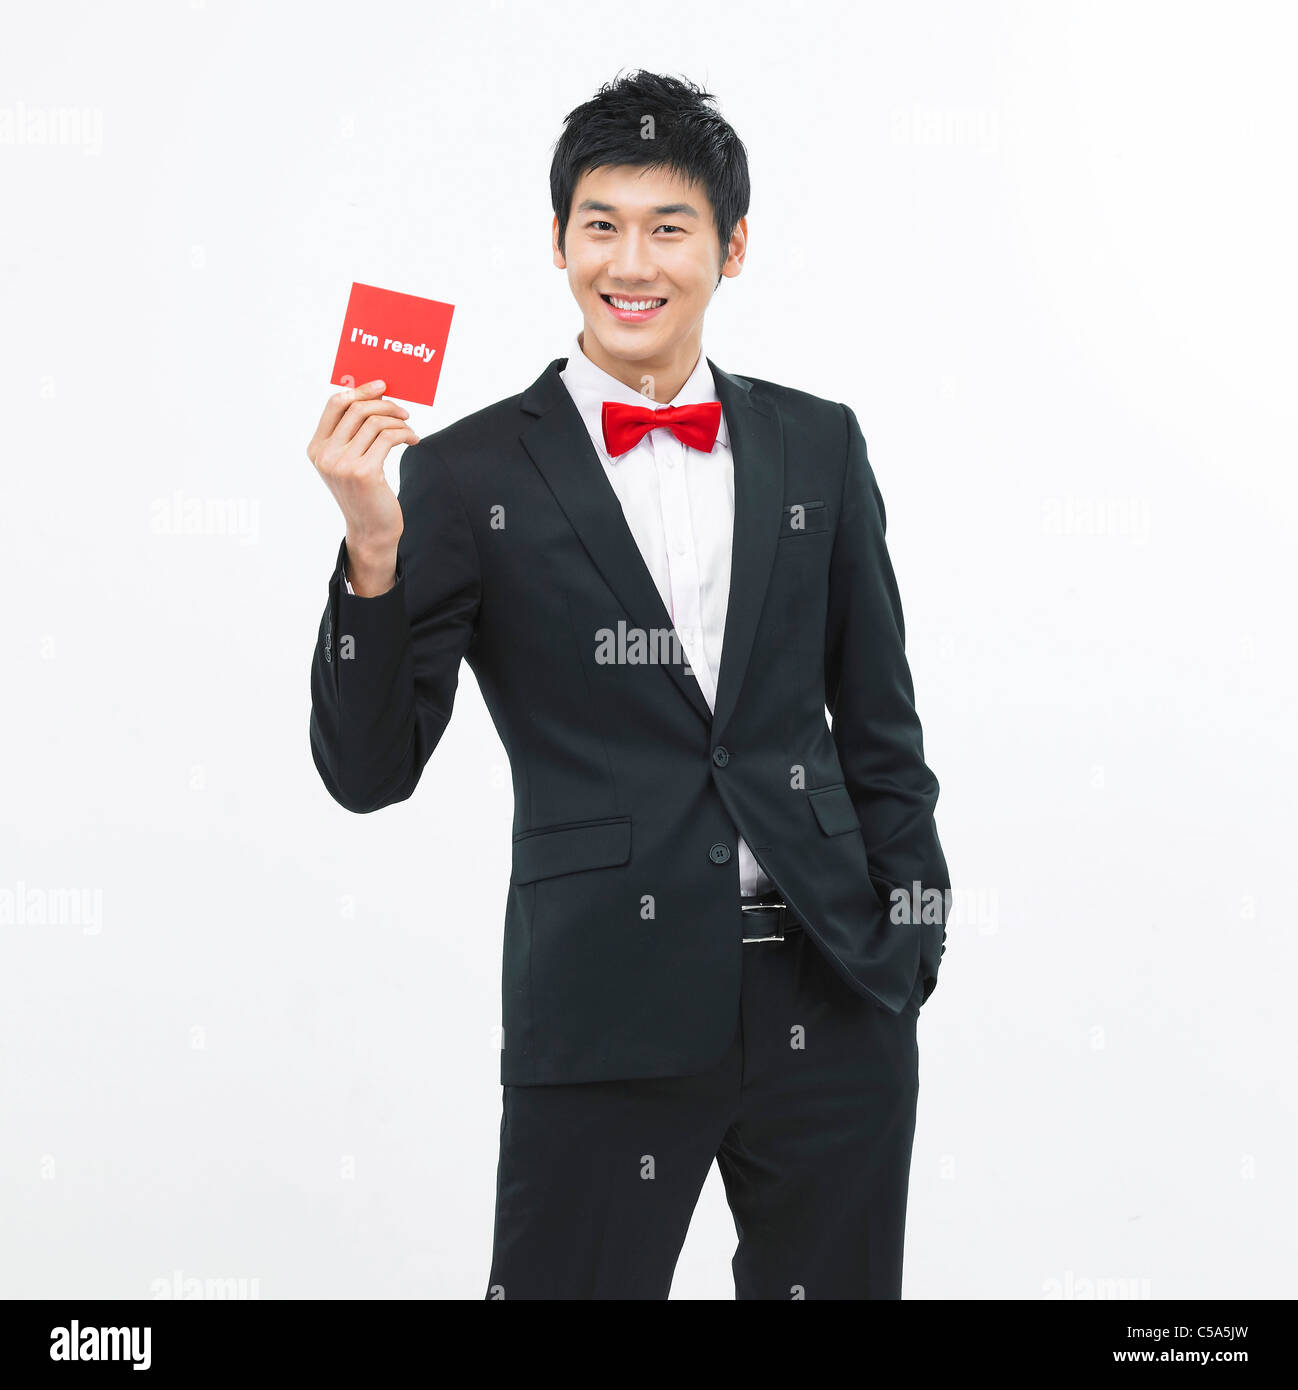 Portrait of young man holding card Banque D'Images